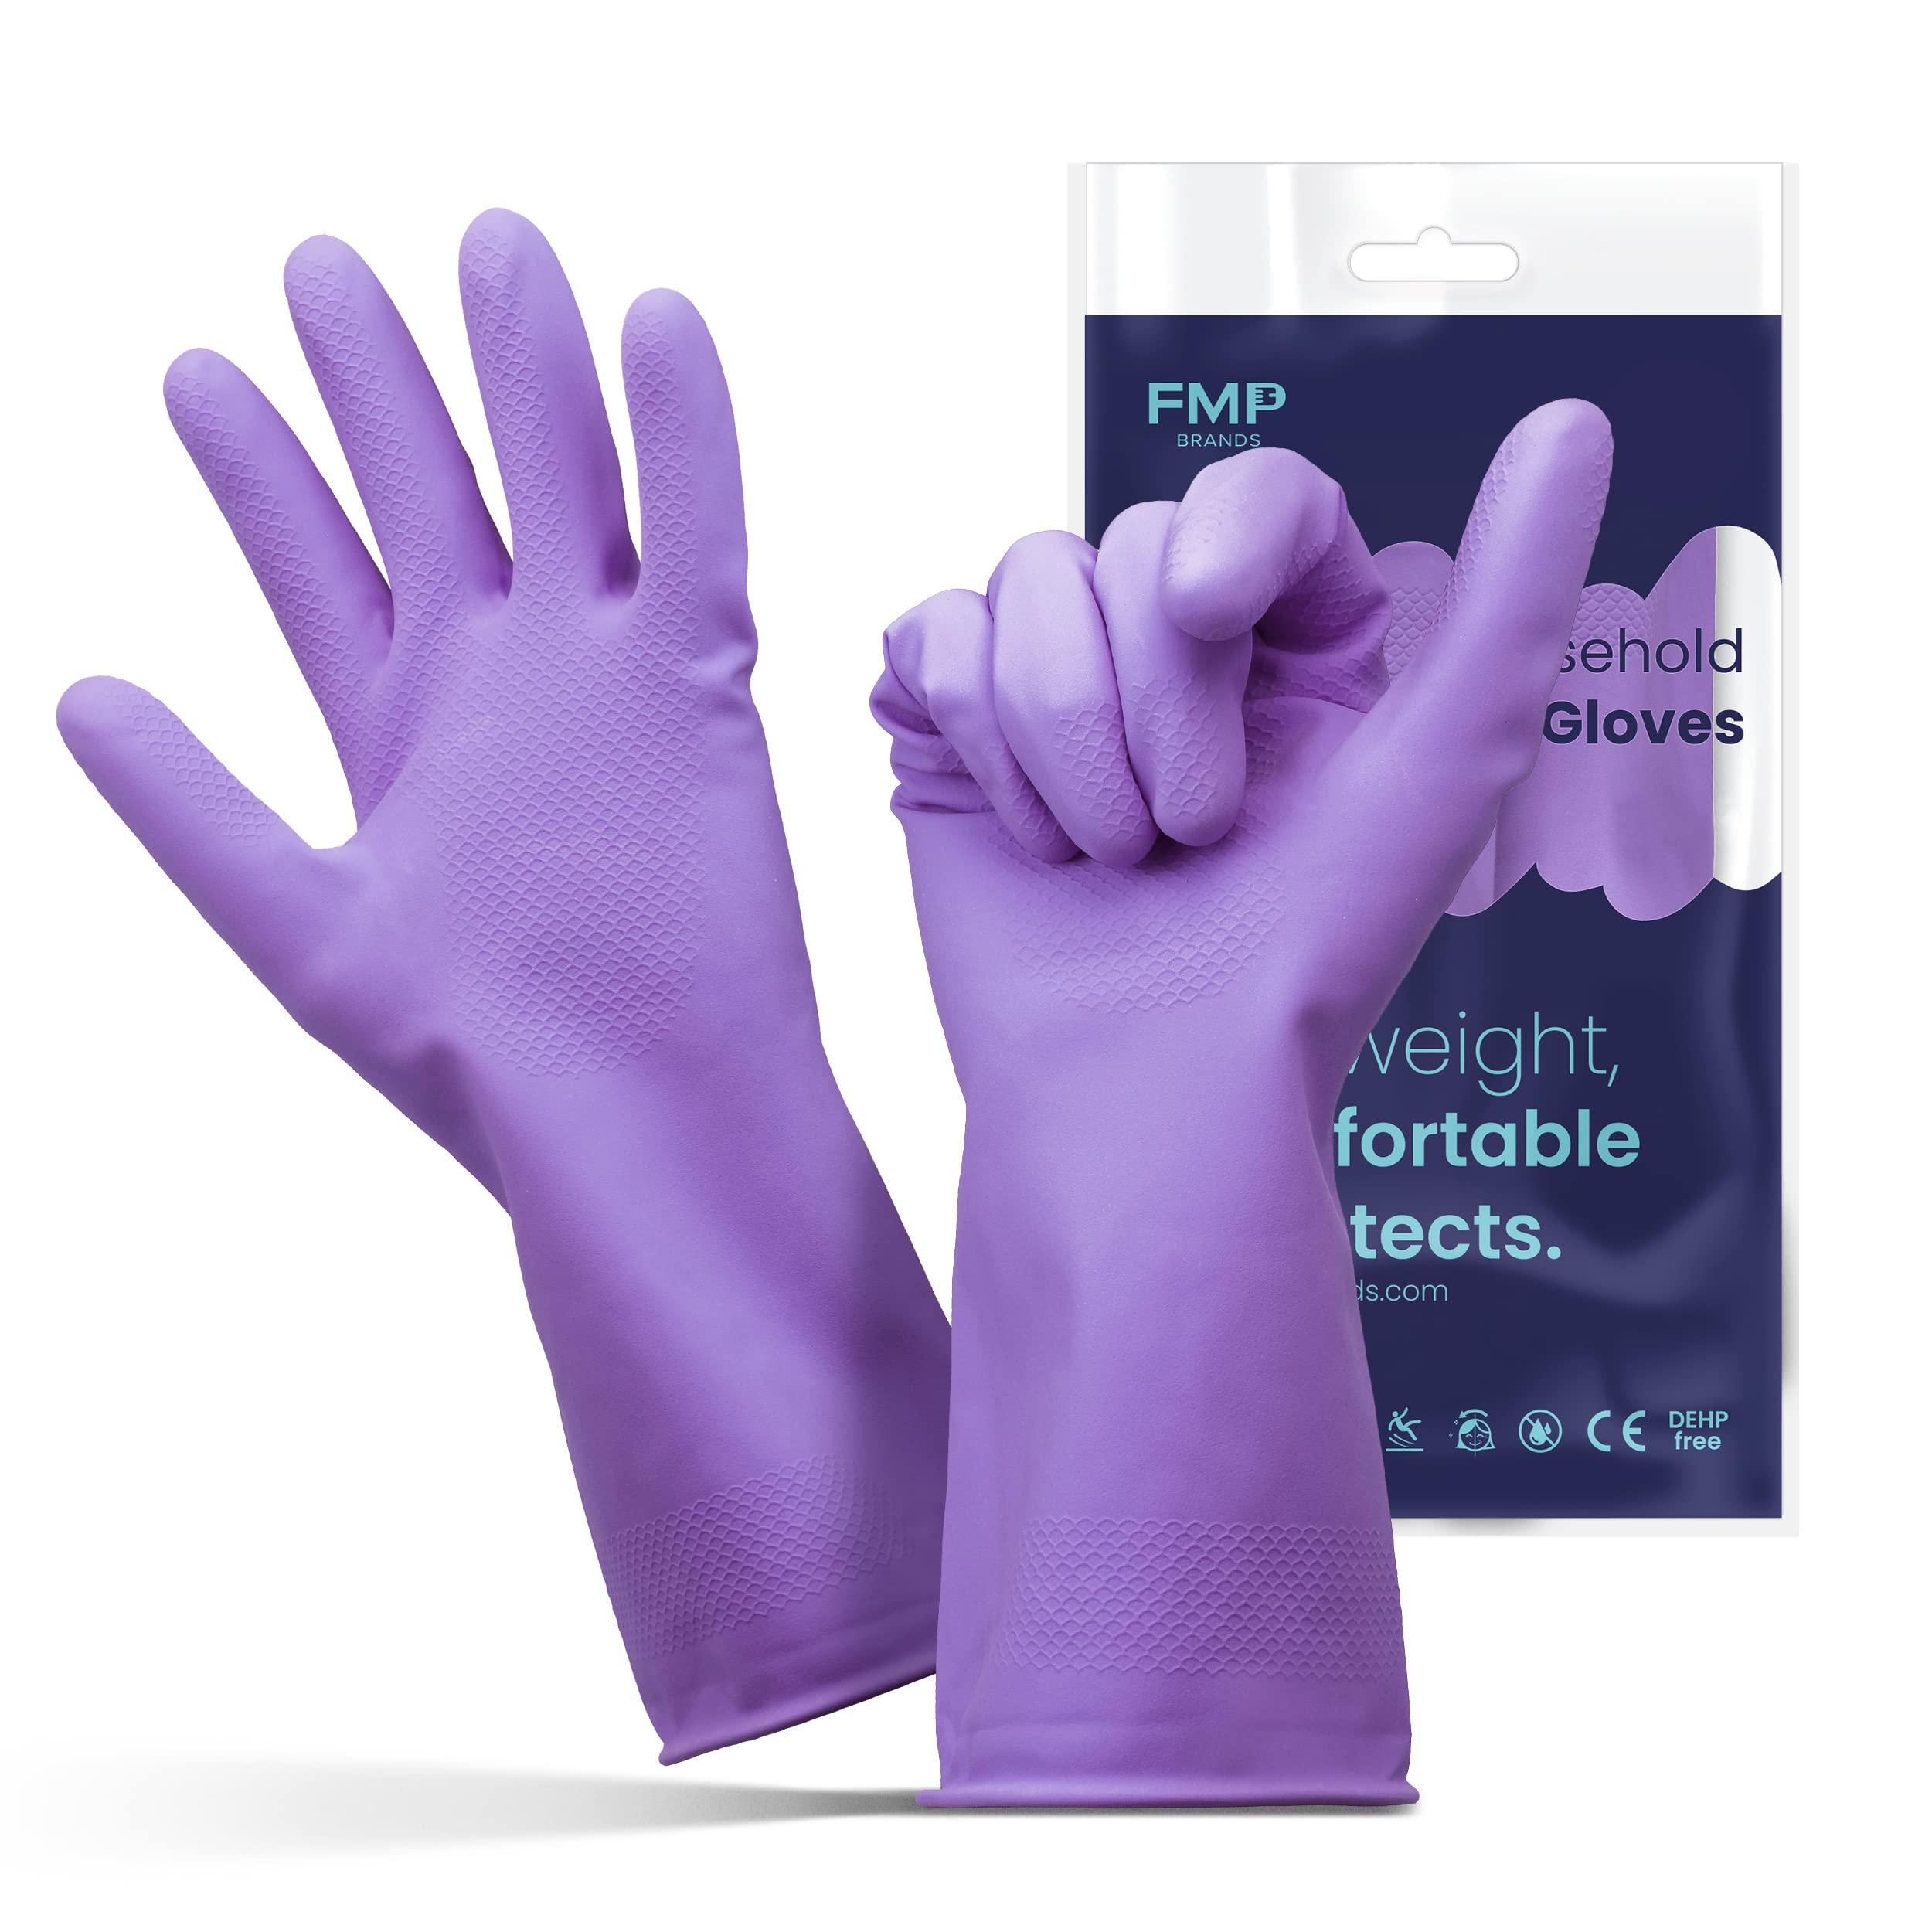 fmp brands cleaning gloves, 3 pairs rubber gloves for washing dishes, non-slip dishwashing gloves, waterproof reusable latex 